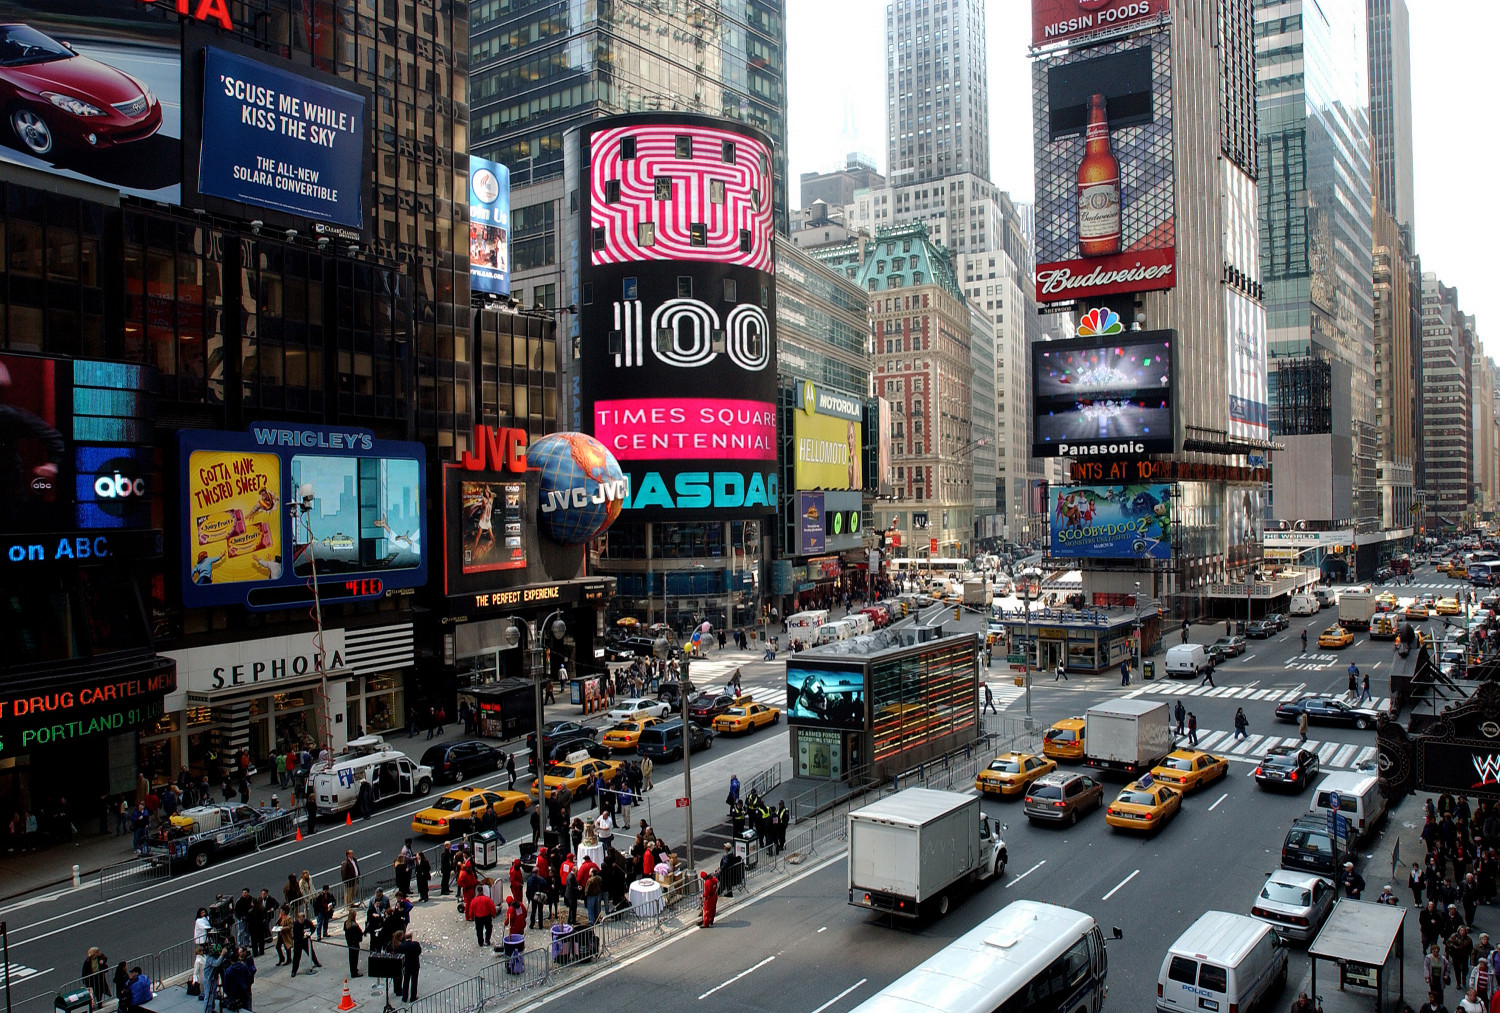 Man Arrested After Police Say He Was Plotting to Throw Grenades at People in Times Square